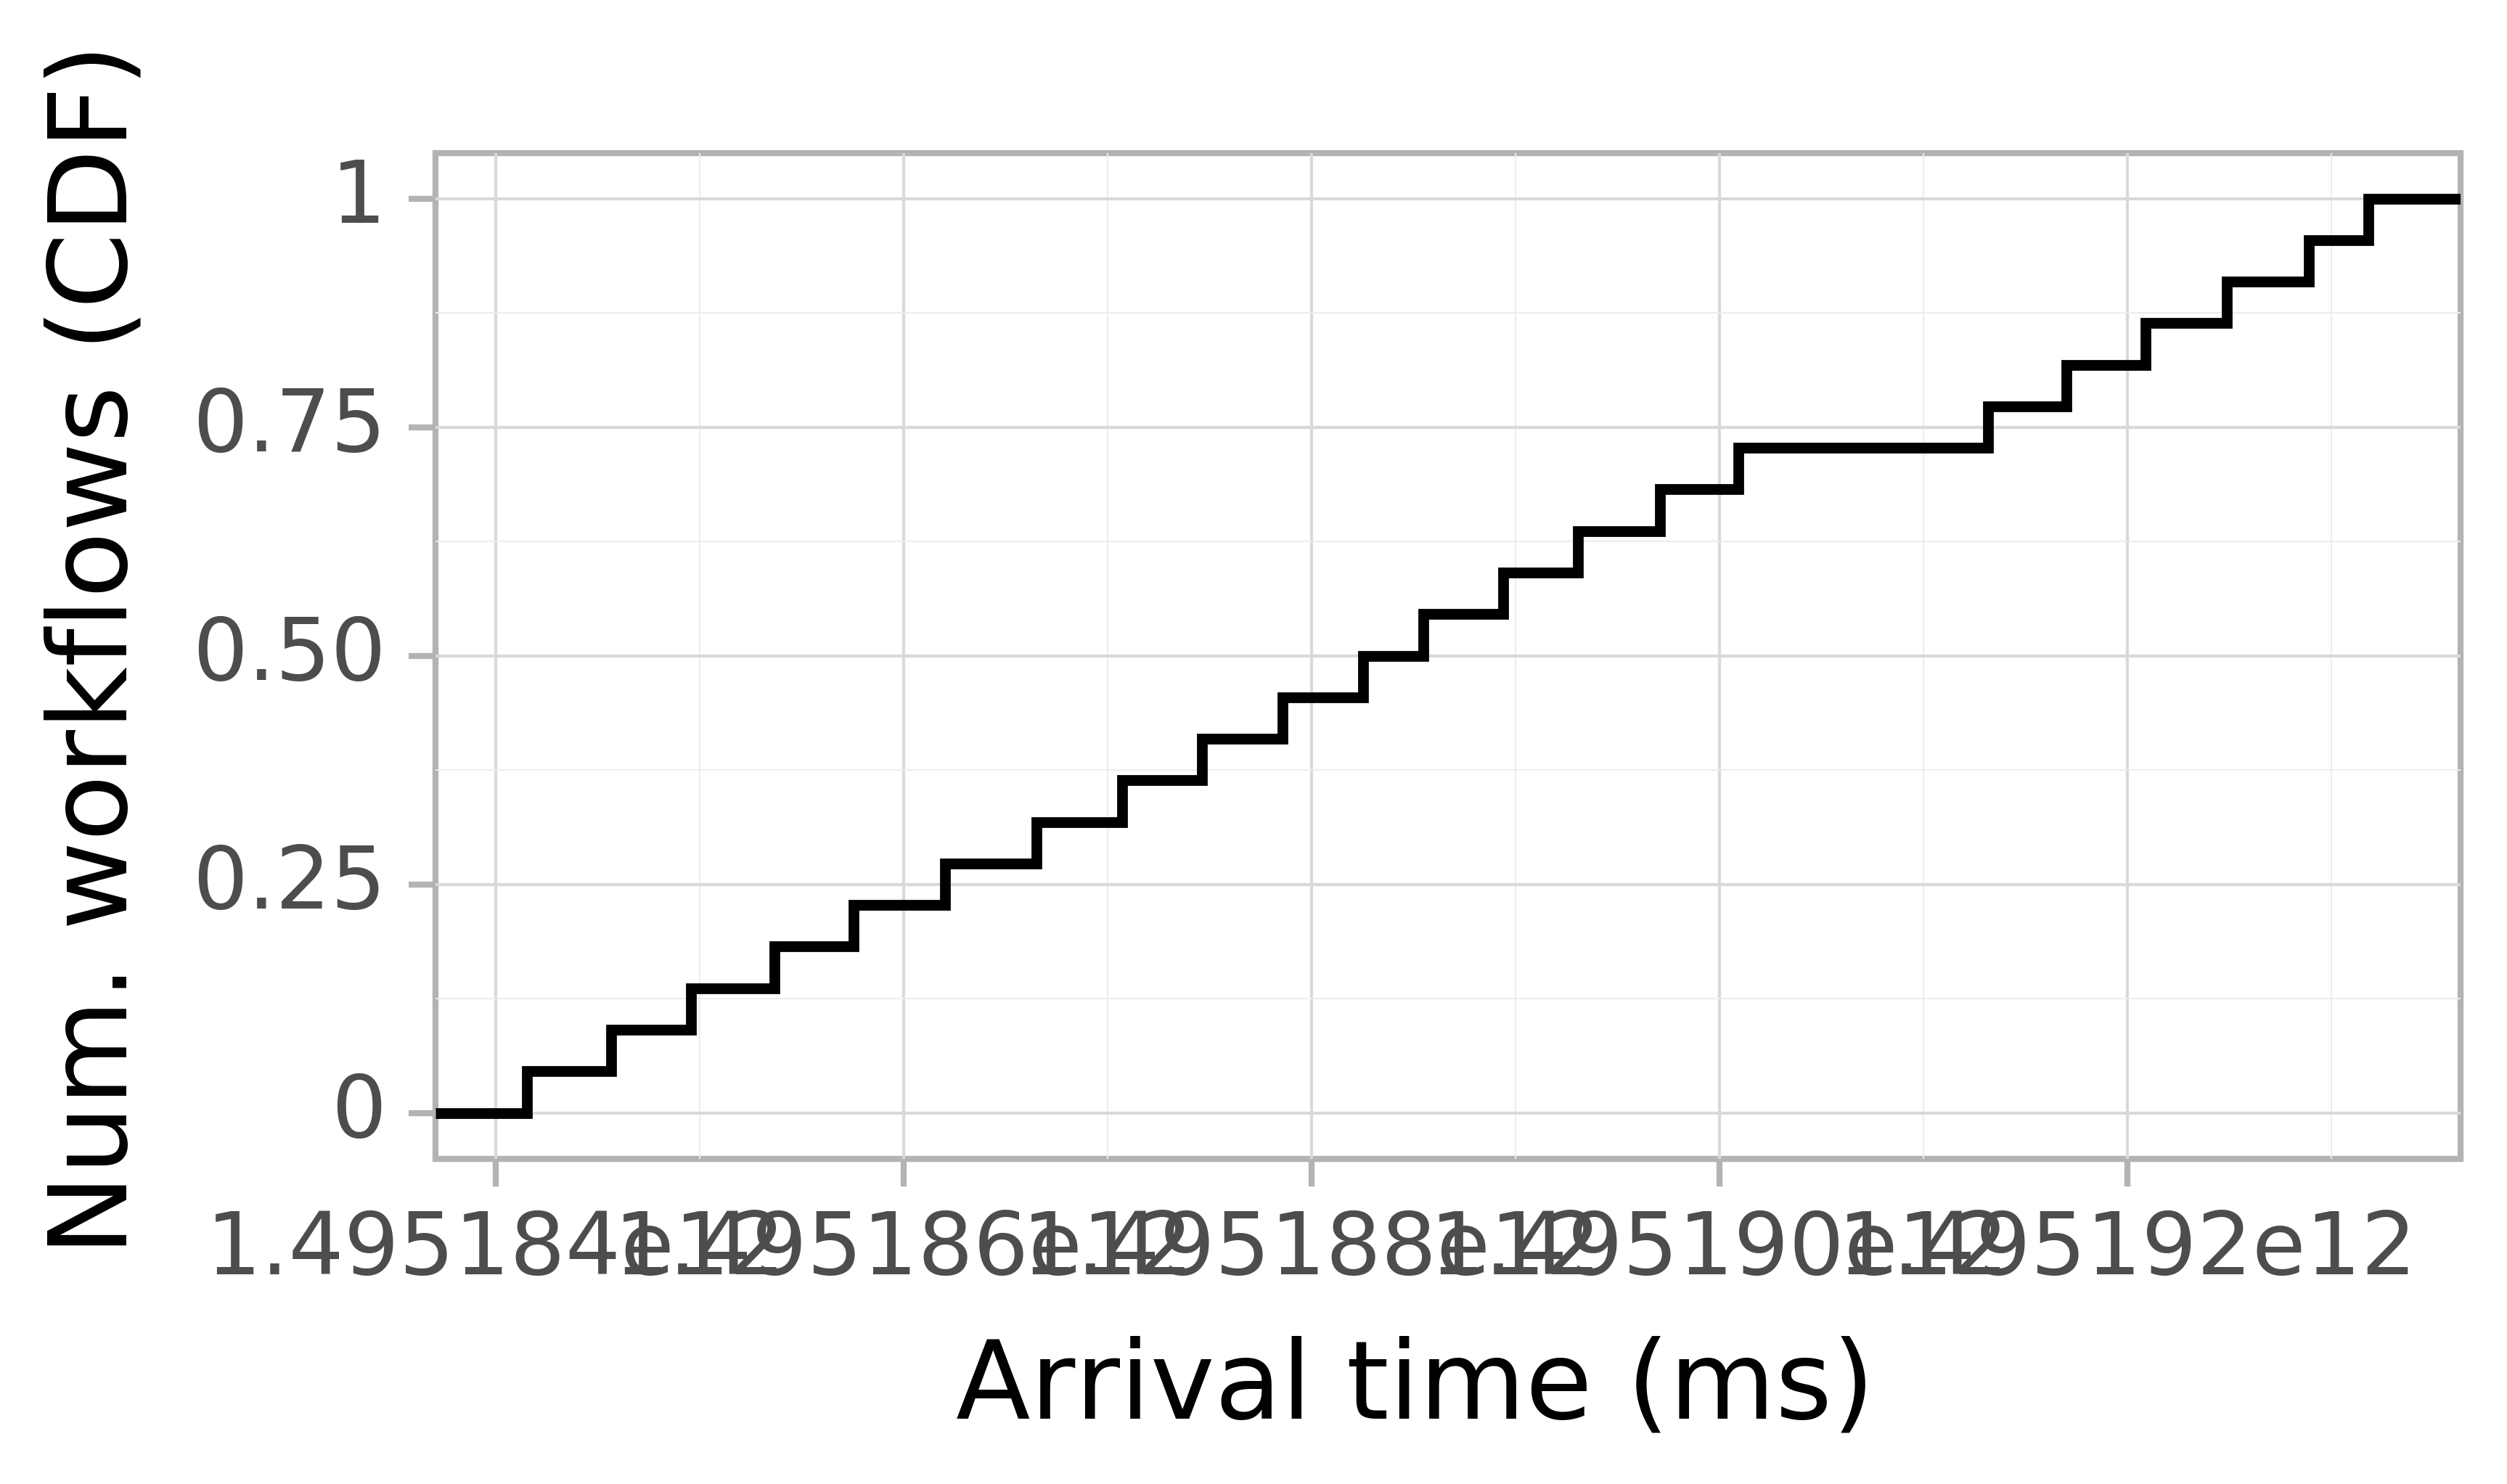 Job arrival CDF graph for the askalon-new_ee65 trace.